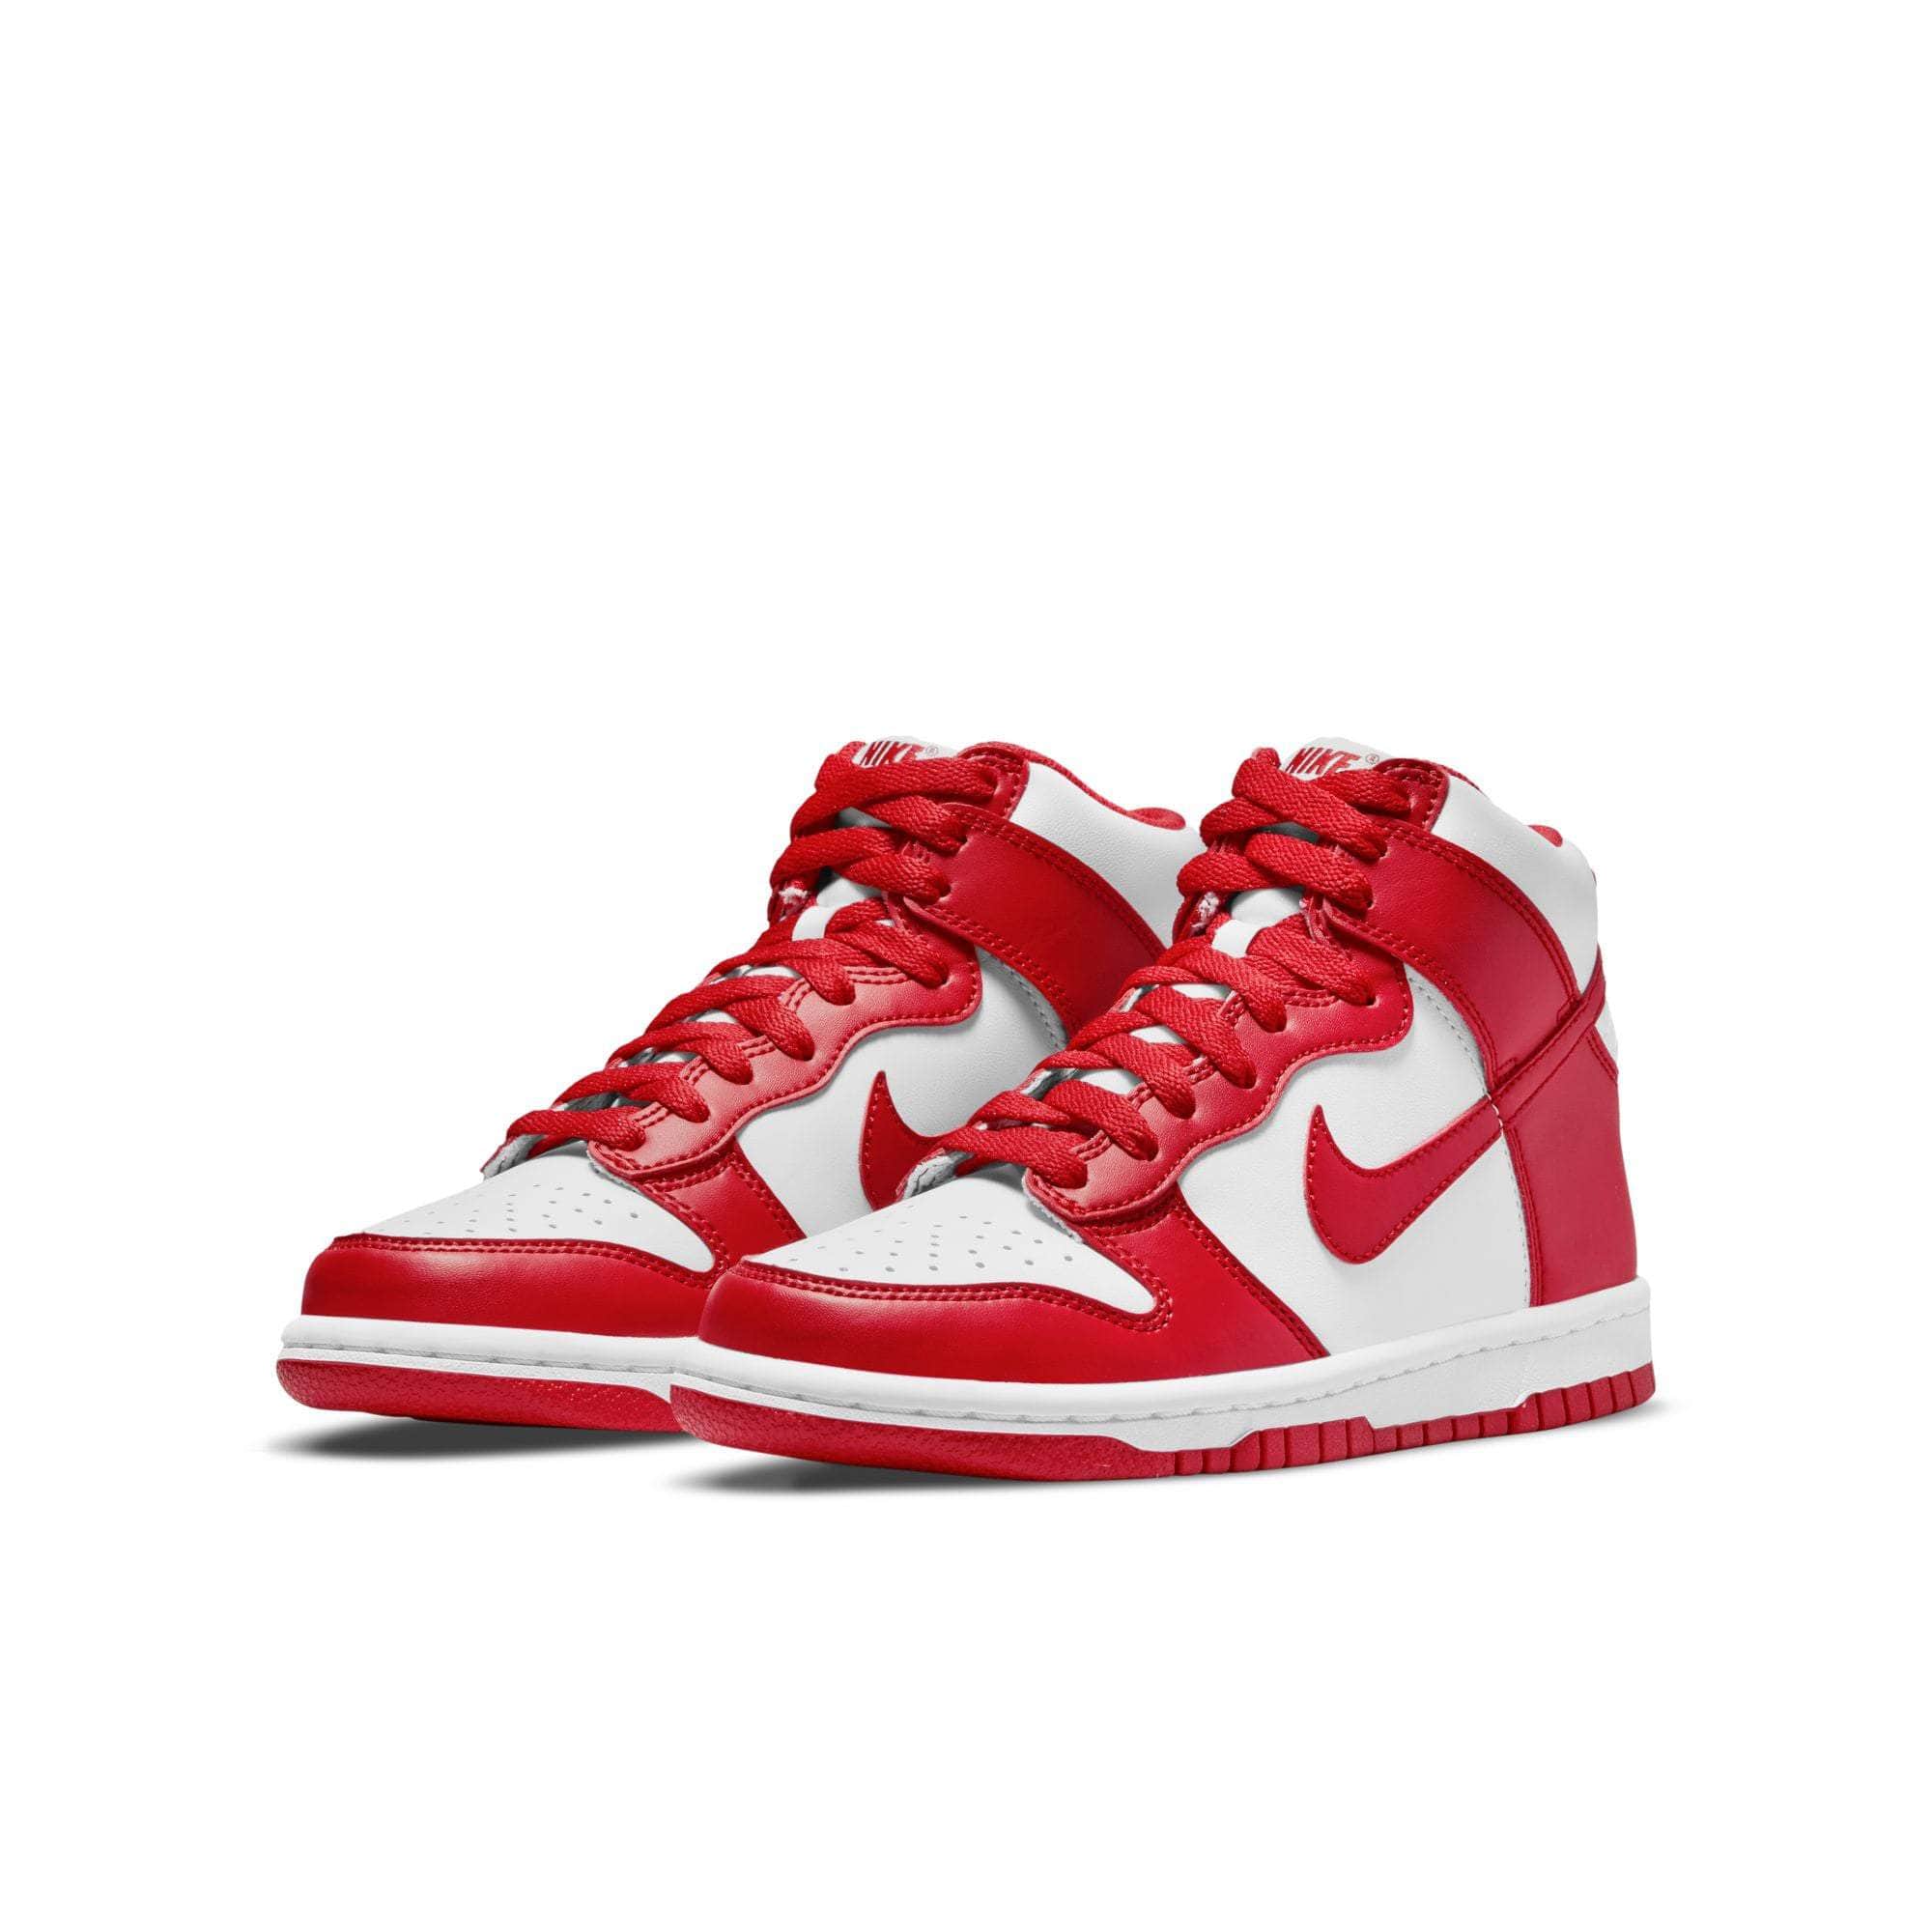 Nike "Championship White Red" - Boy's GS GBNY